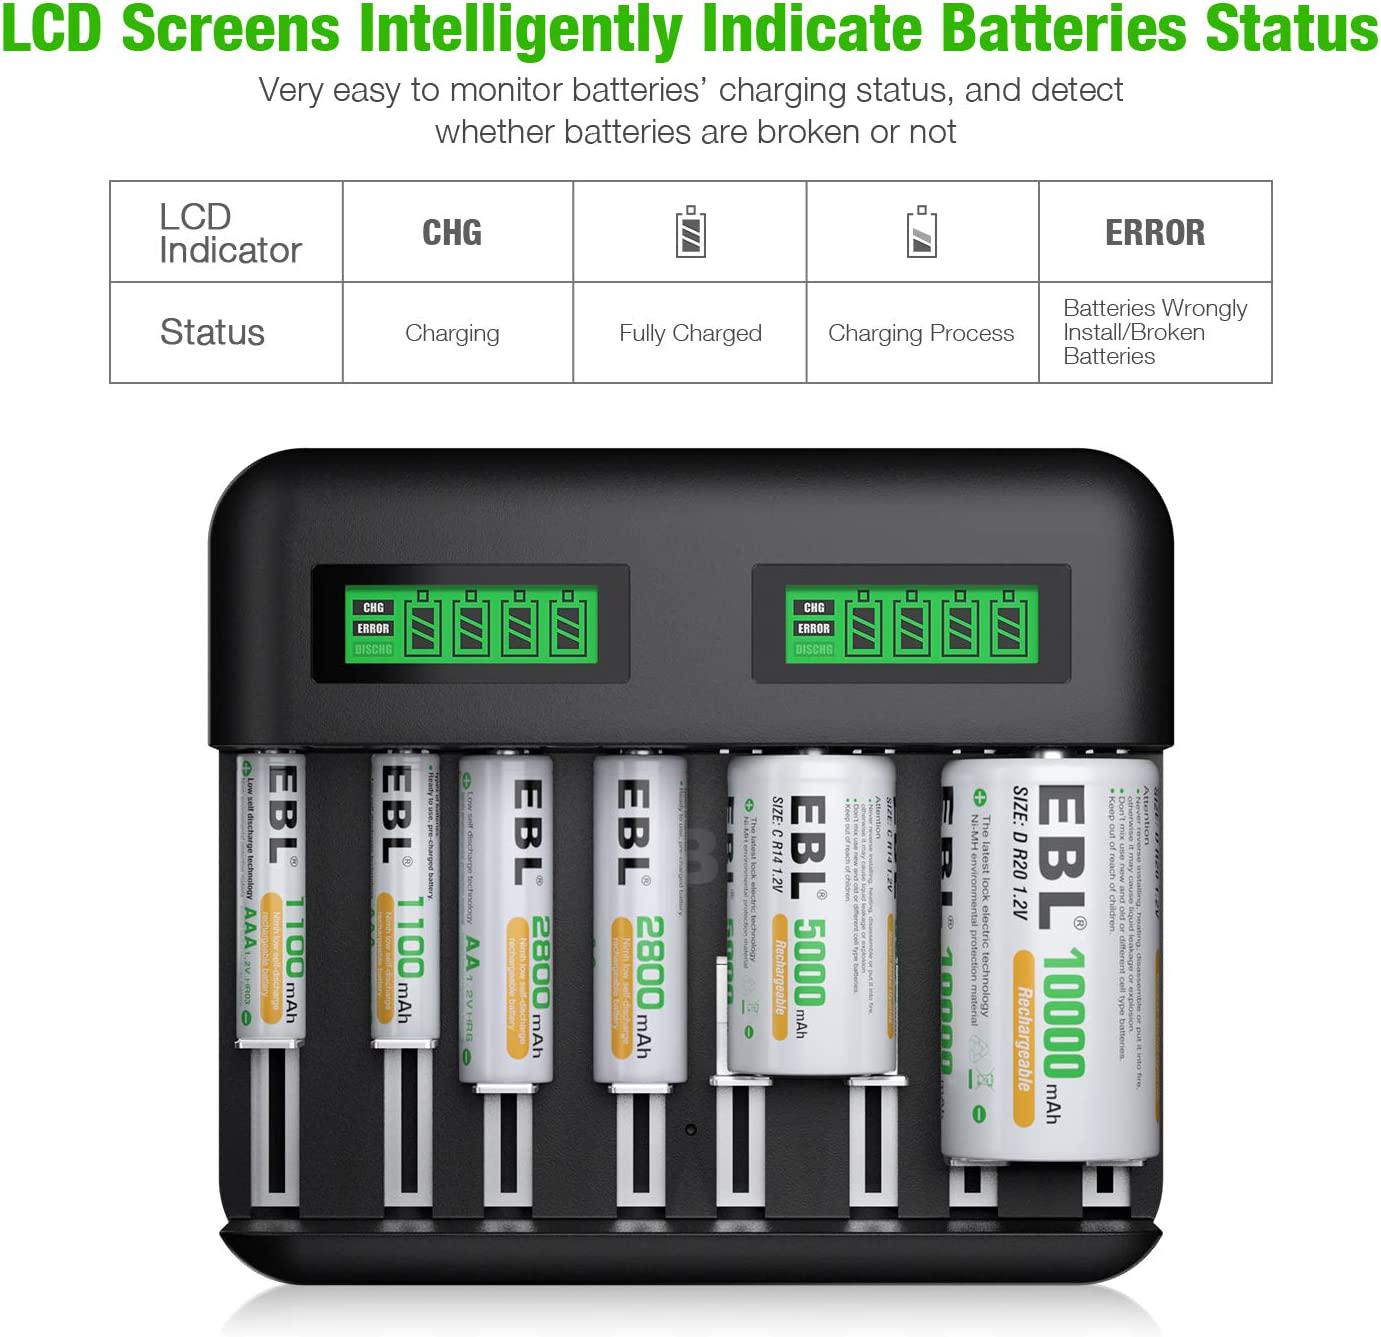 EBL, EBL 9008 LCD 8 Bay Universal Battery Charger for 1.2V AA AAA C D Rechargeable Batteries with USB Input, Multiple Battery Charger with Intelligent Battery Detection Technology